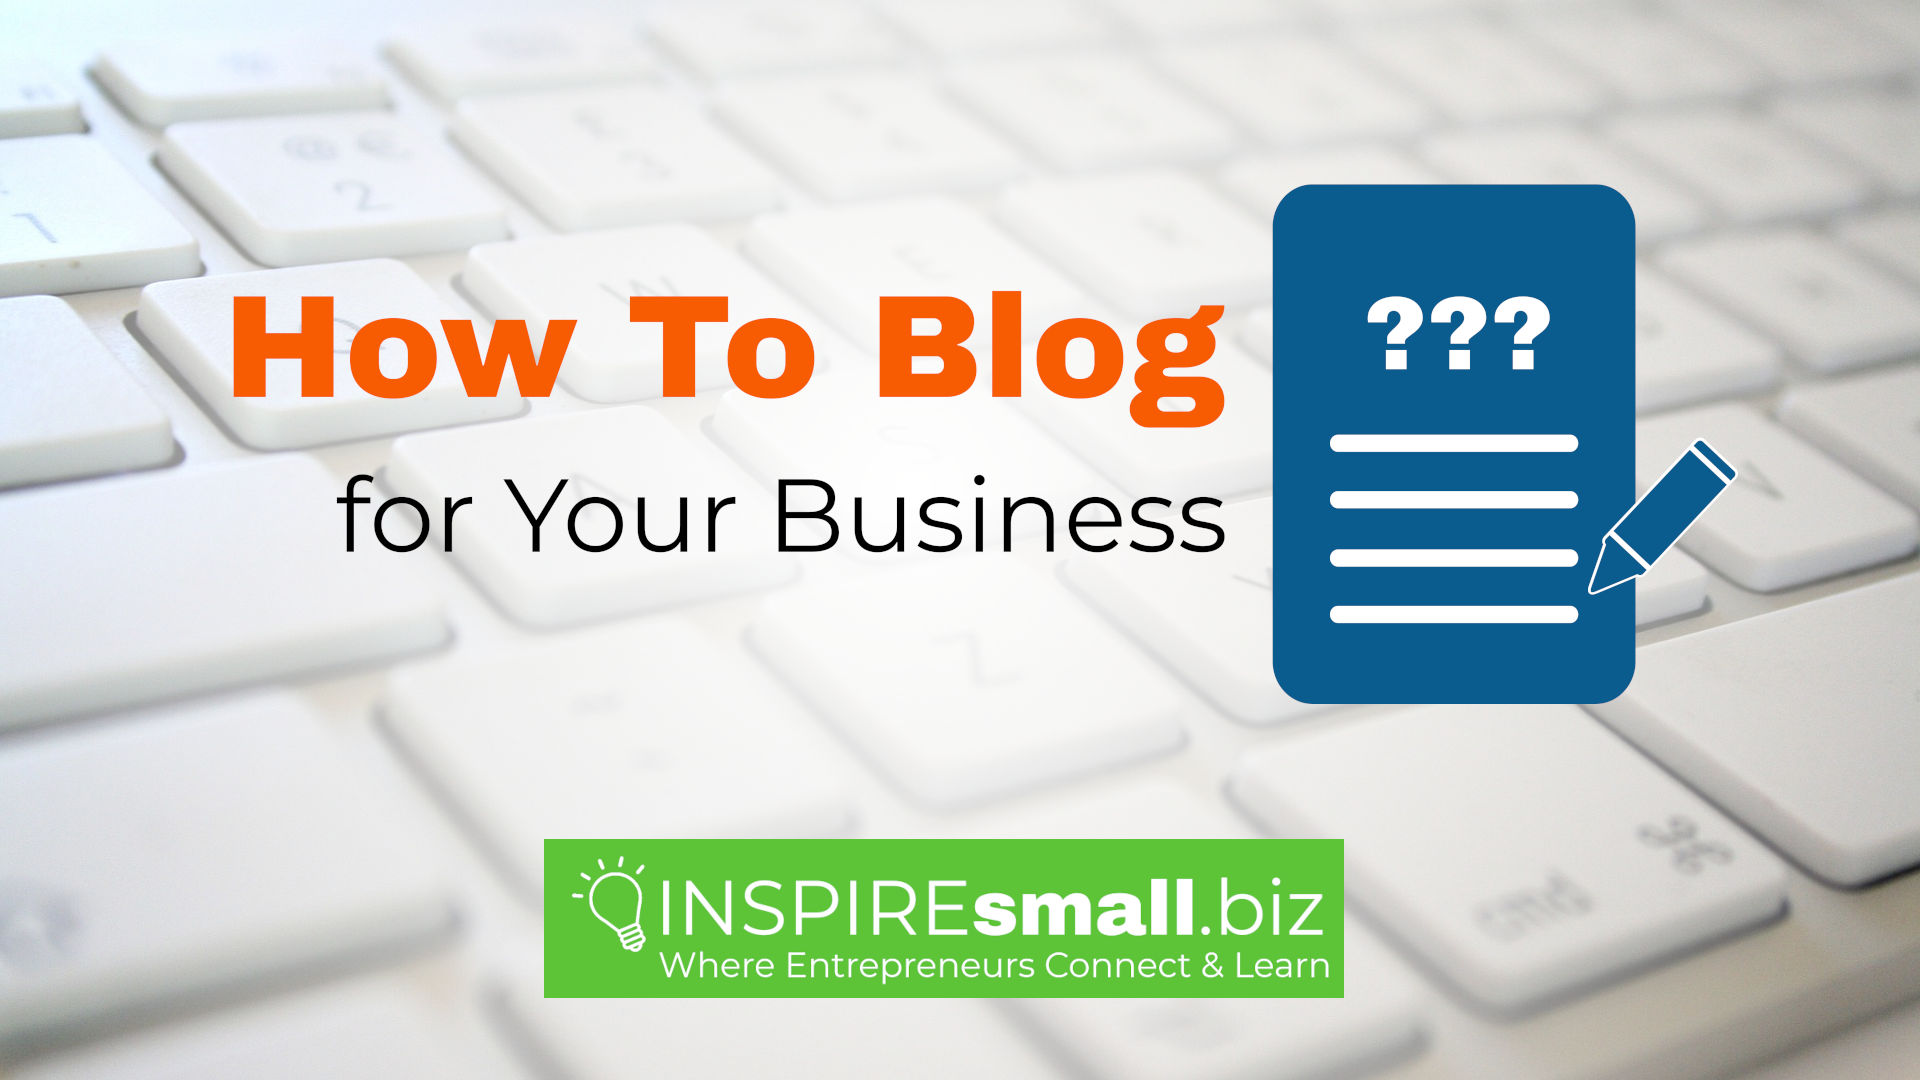 How to Blog for Your Business, from INSPIREsmall.biz